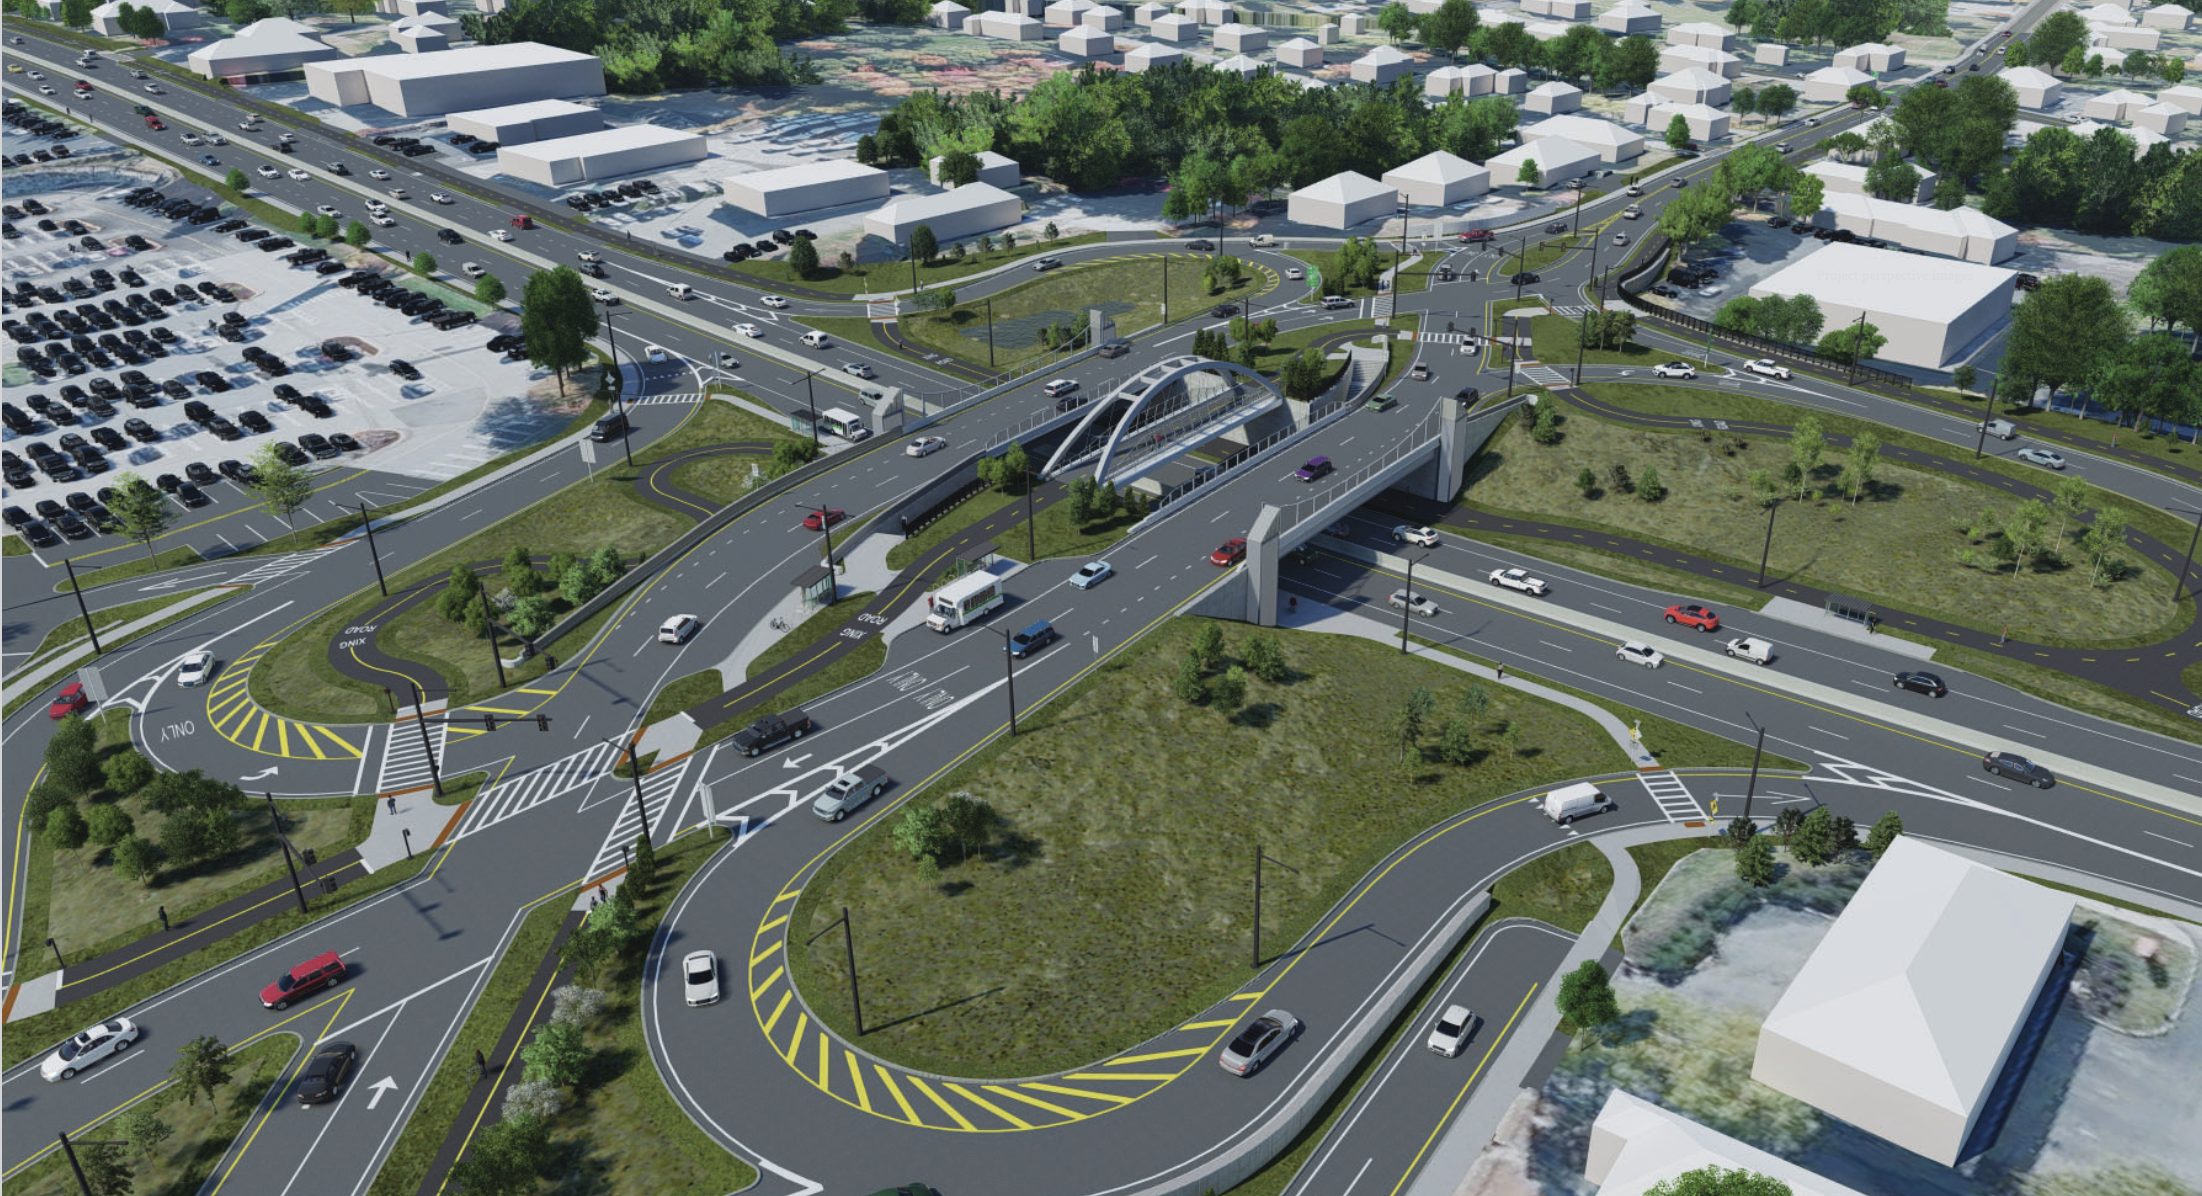 A rendering of a complex cloverleaf intersection over a four-lane highway lined with parking lots and strip malls. The interchange features three bridges over the highway, two for motor vehicles and a smaller middle bridge for bikes and pedestrians, with intersections on either side.